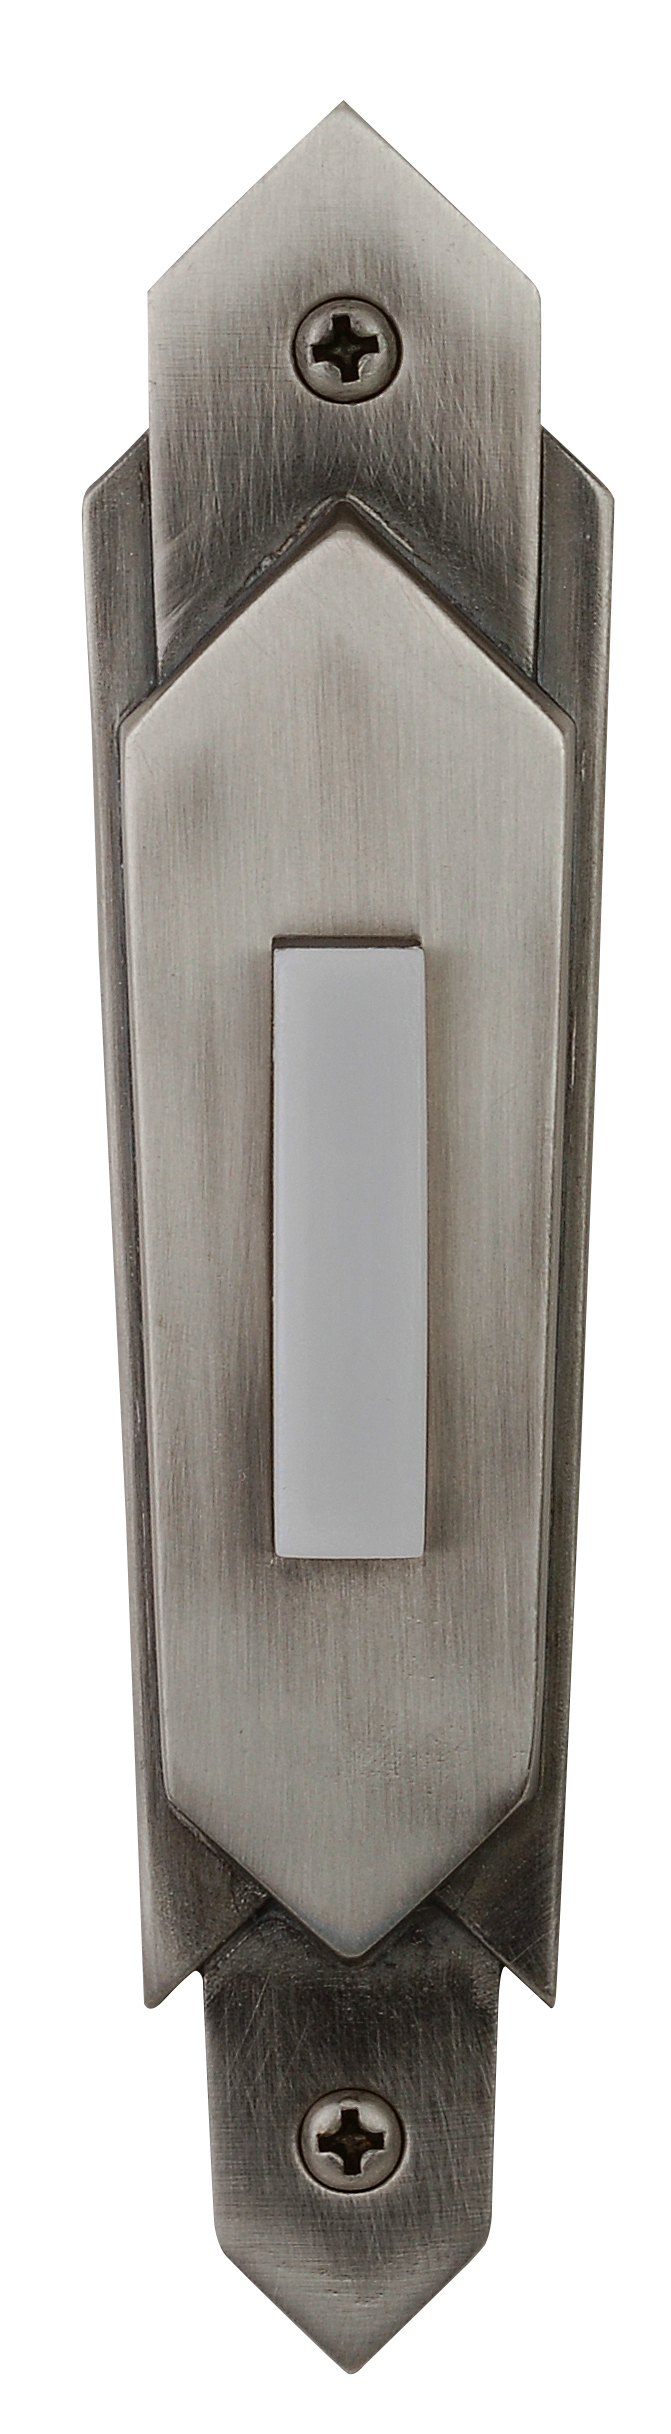 Surface Mount Contemporary Lighted Push Button